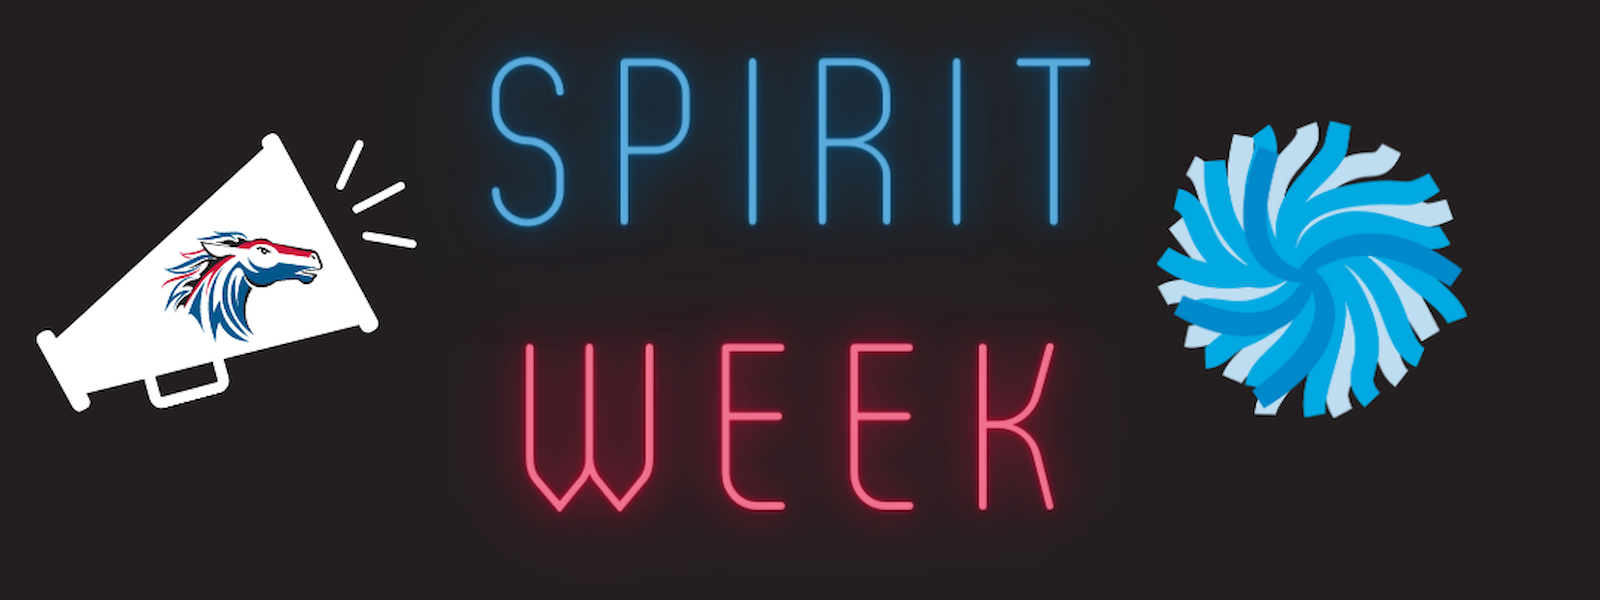 black background with 'spirit' in blue neon and 'week' in red neon, megaphone and pom pom